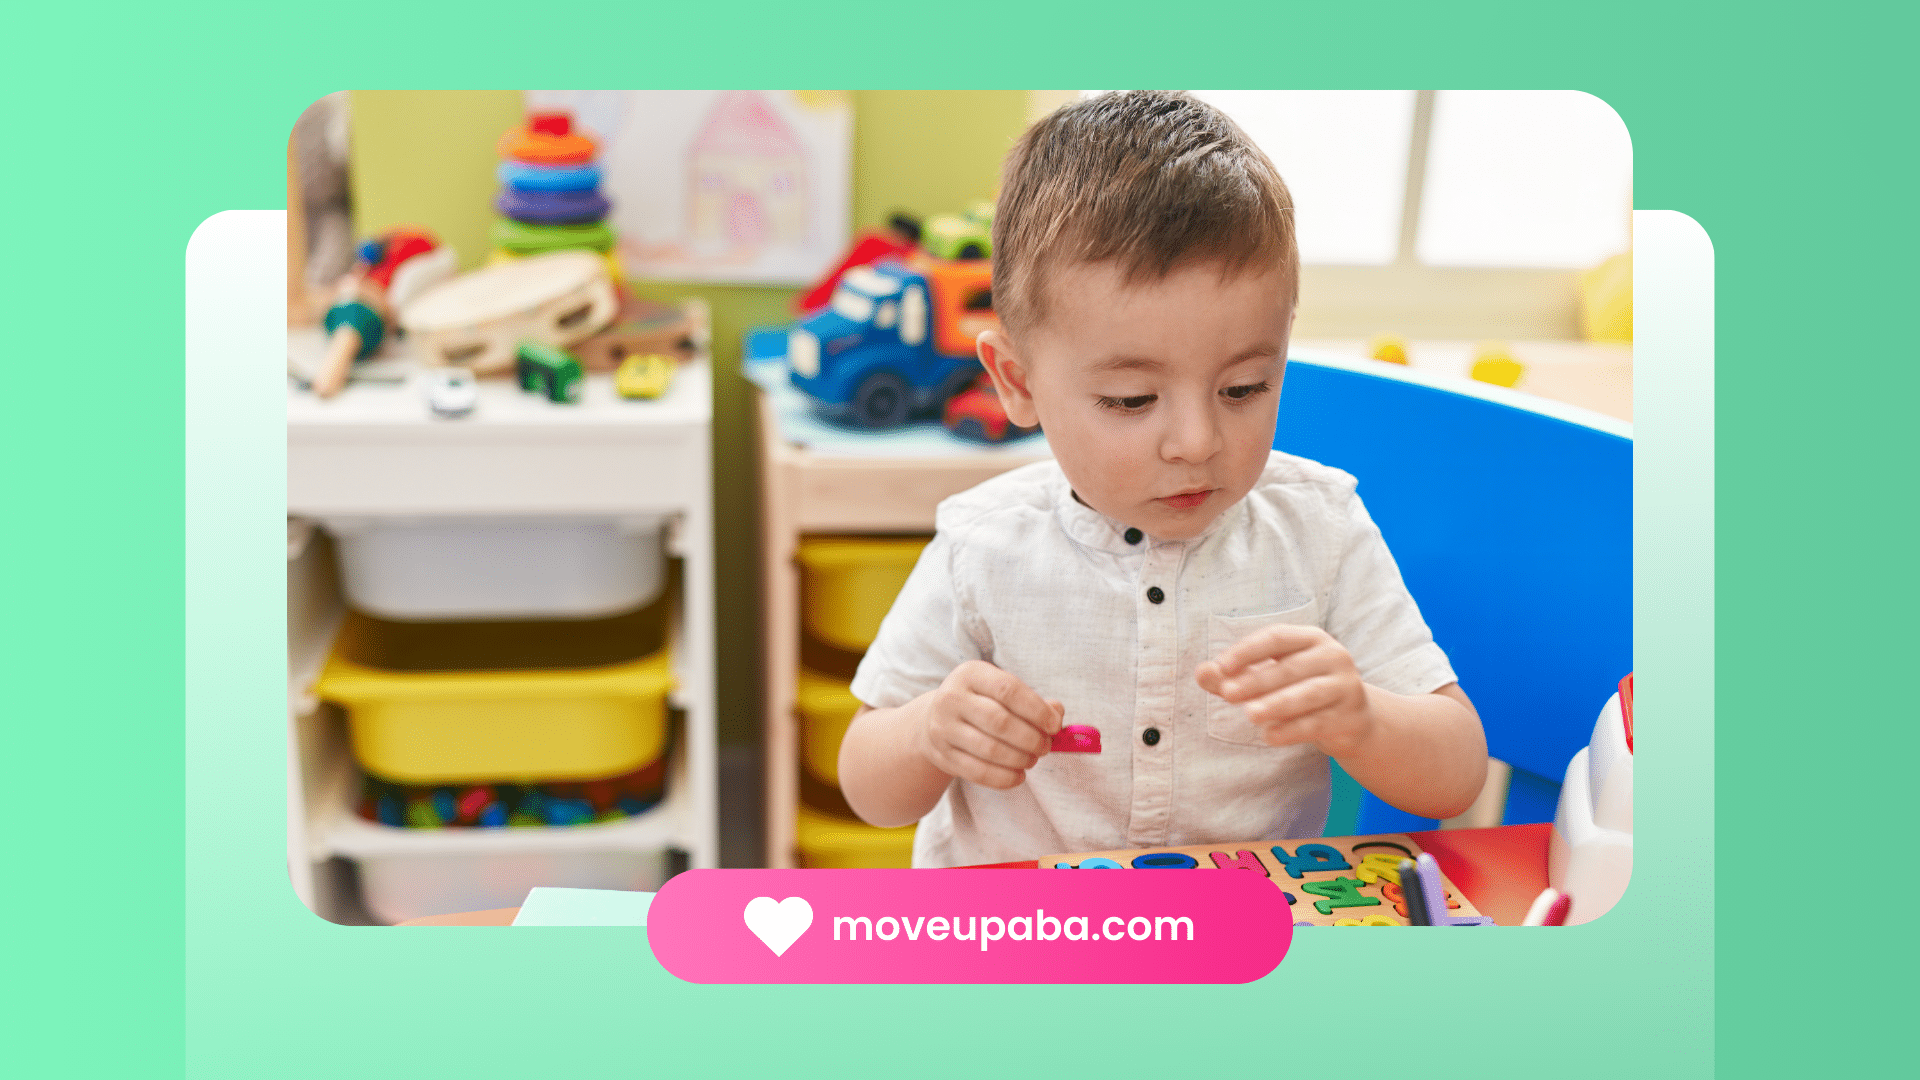 A young boy engaging in a sensory activity with colorful educational toys